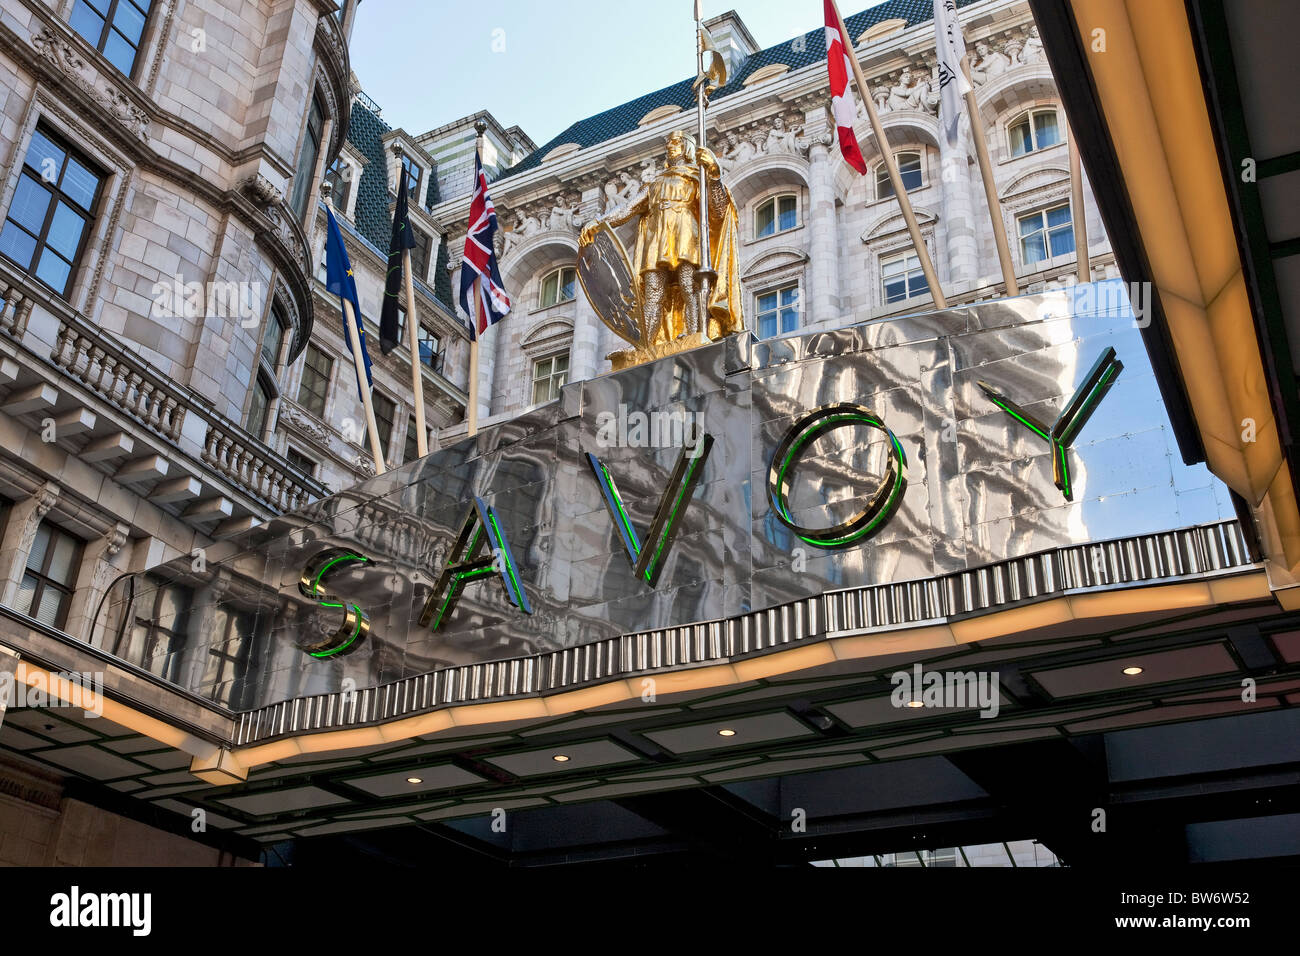 The refurbished Savoy Hotel in London - reopened in October 2010. Stock Photo